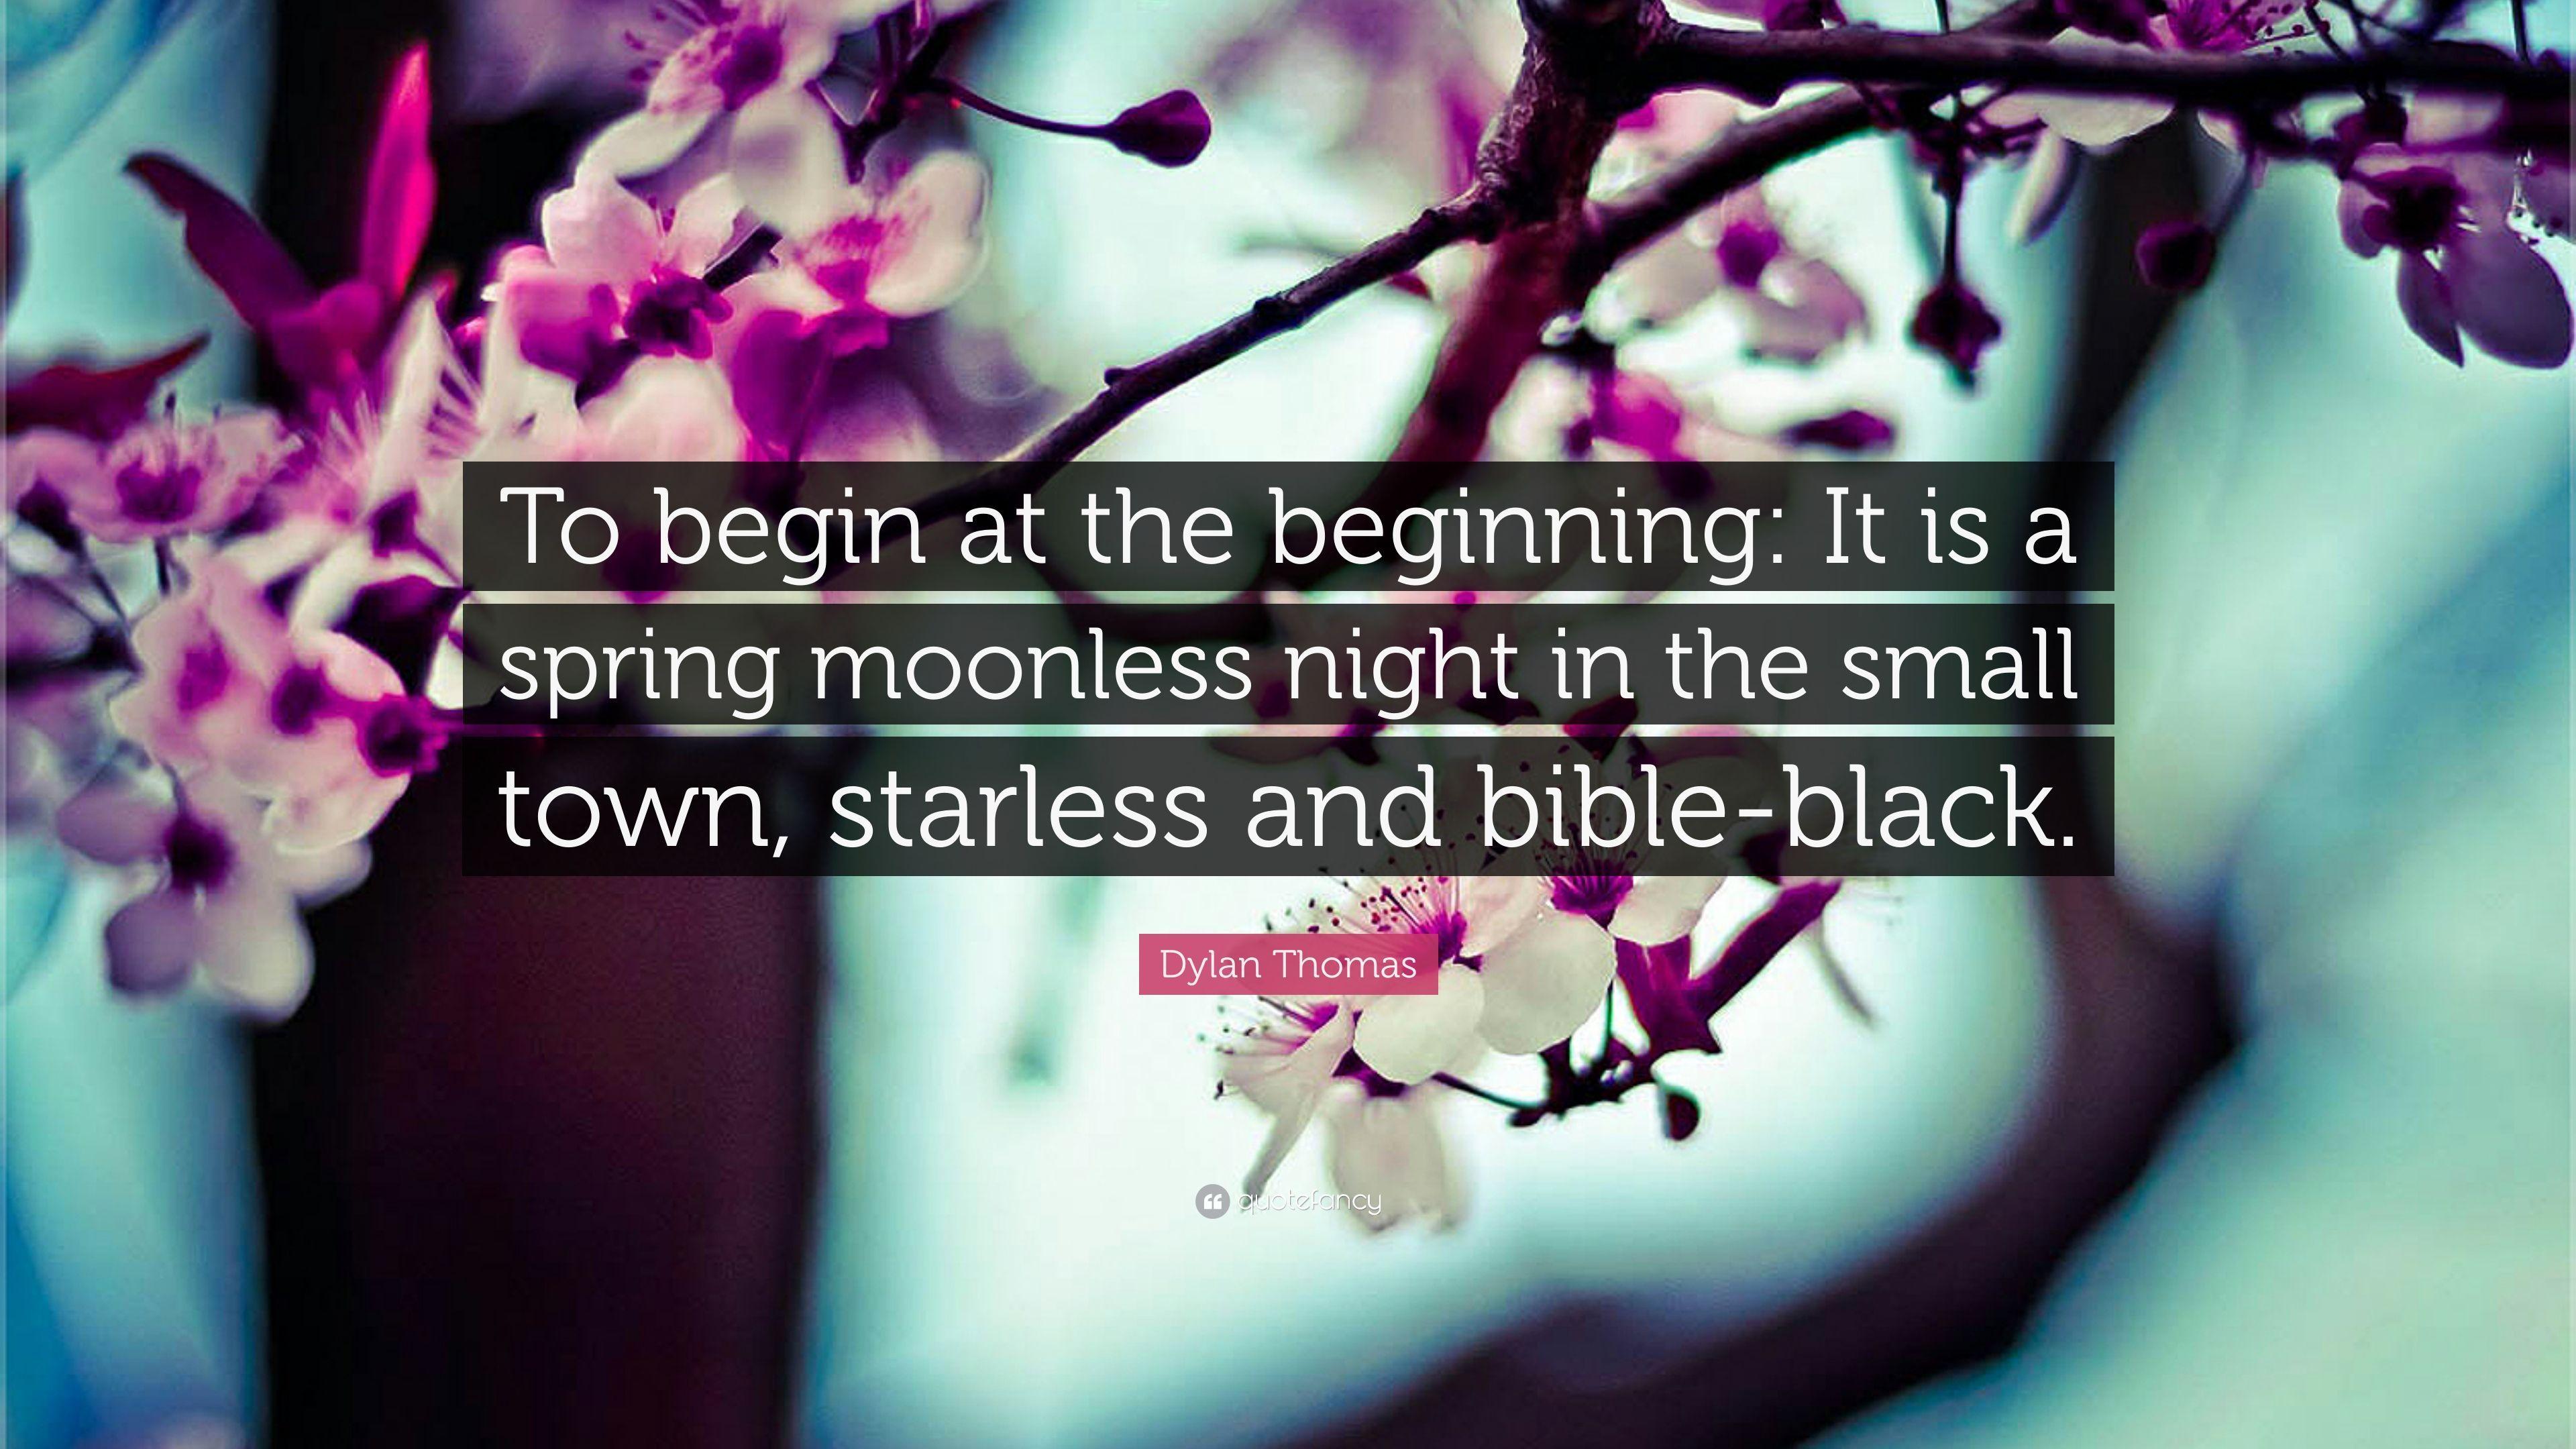 Dylan Thomas Quote: “To begin at the beginning: It is a spring